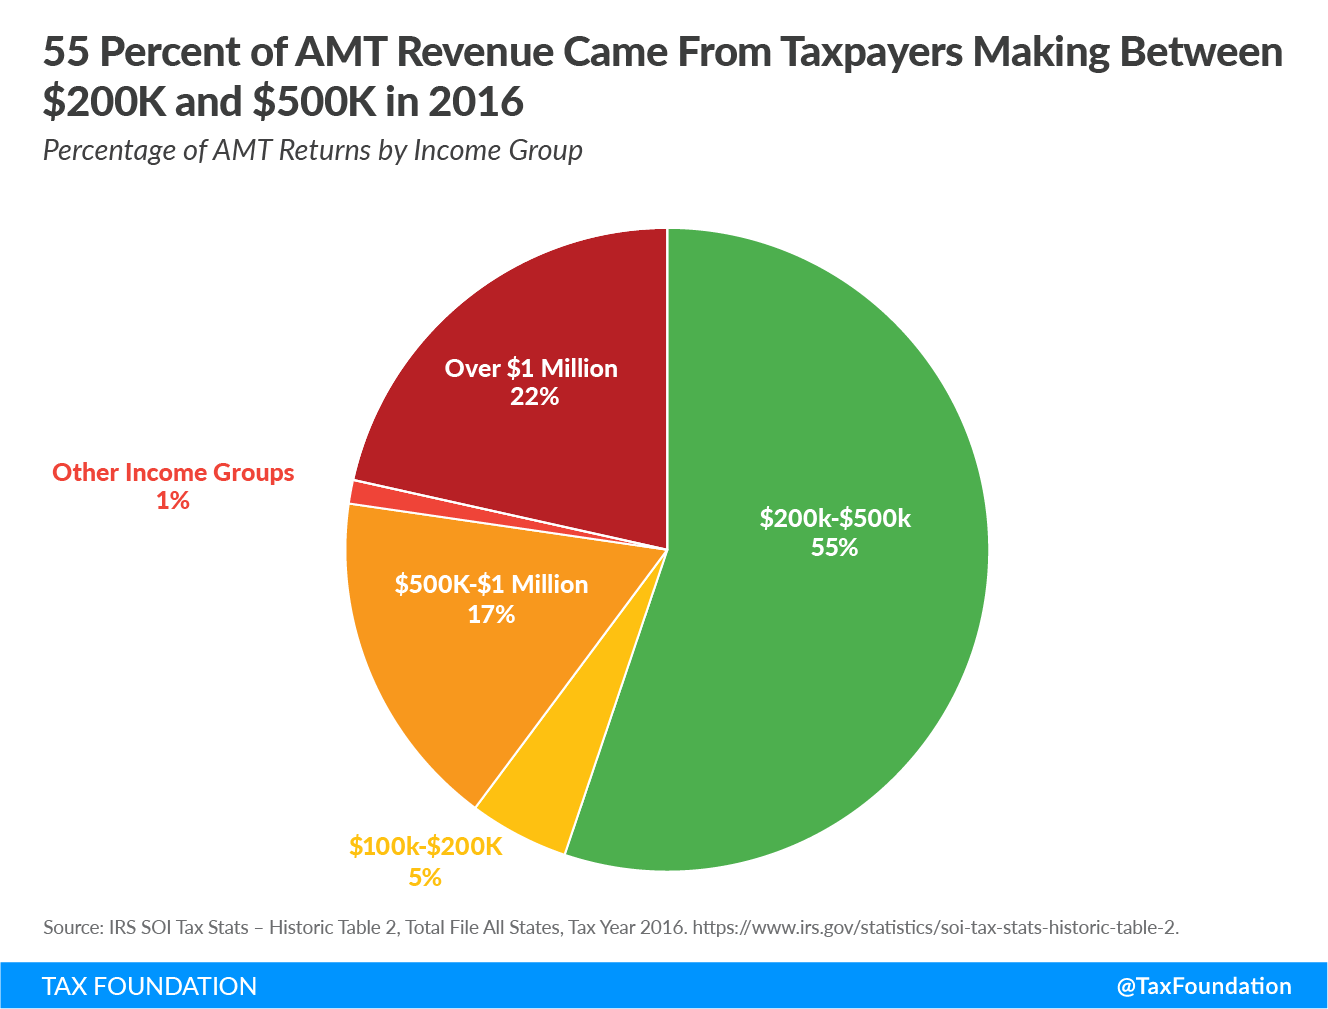 55% of AMT revenue came from taxpayers making between $200k and $500k in 2016